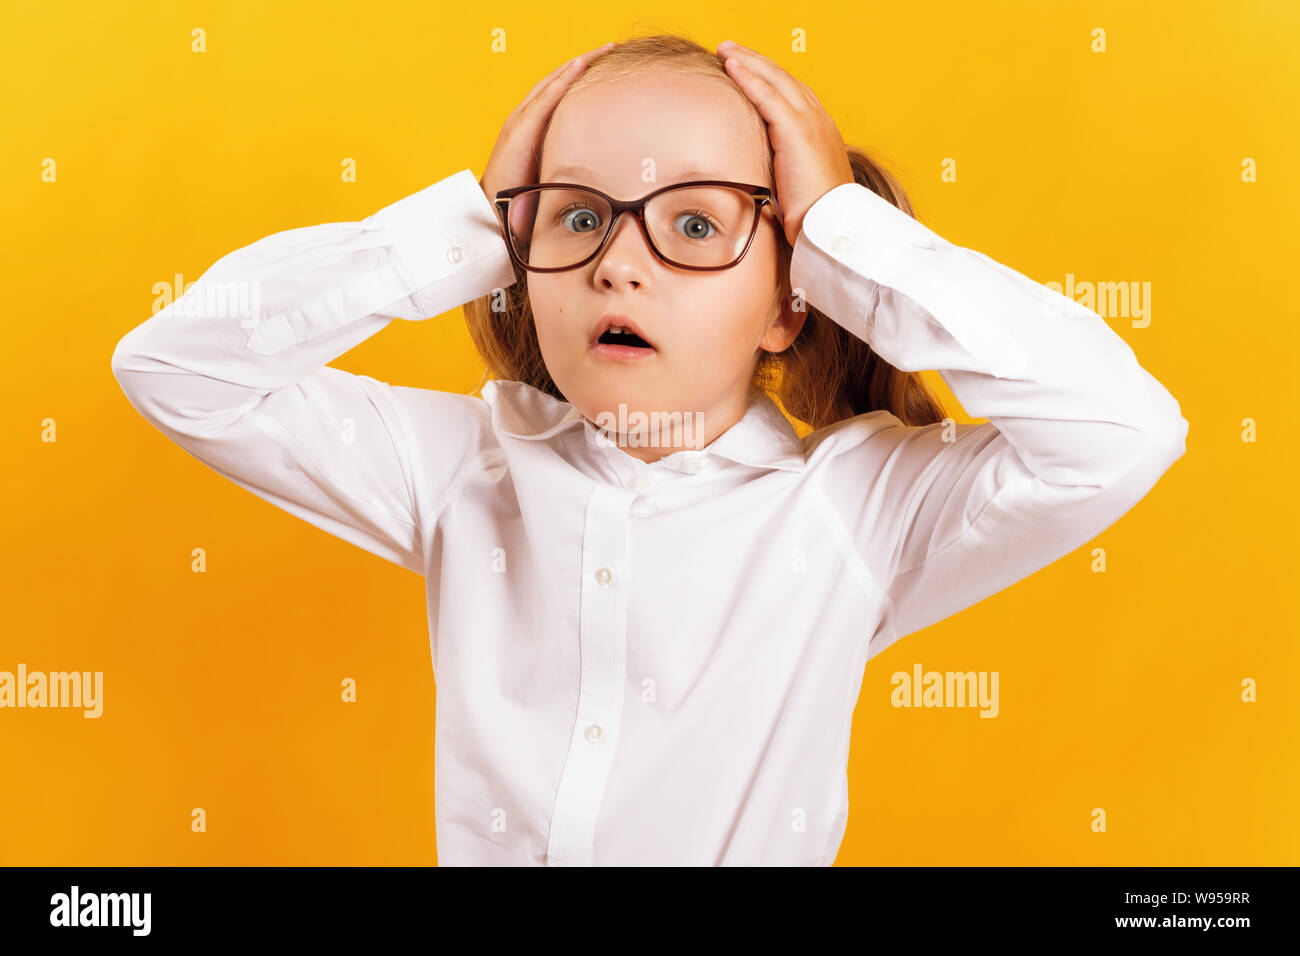 Portrait of a cheerful little girl in glasses on a yellow background. The child is shocked and holds his hands behind his head. Stock Photo